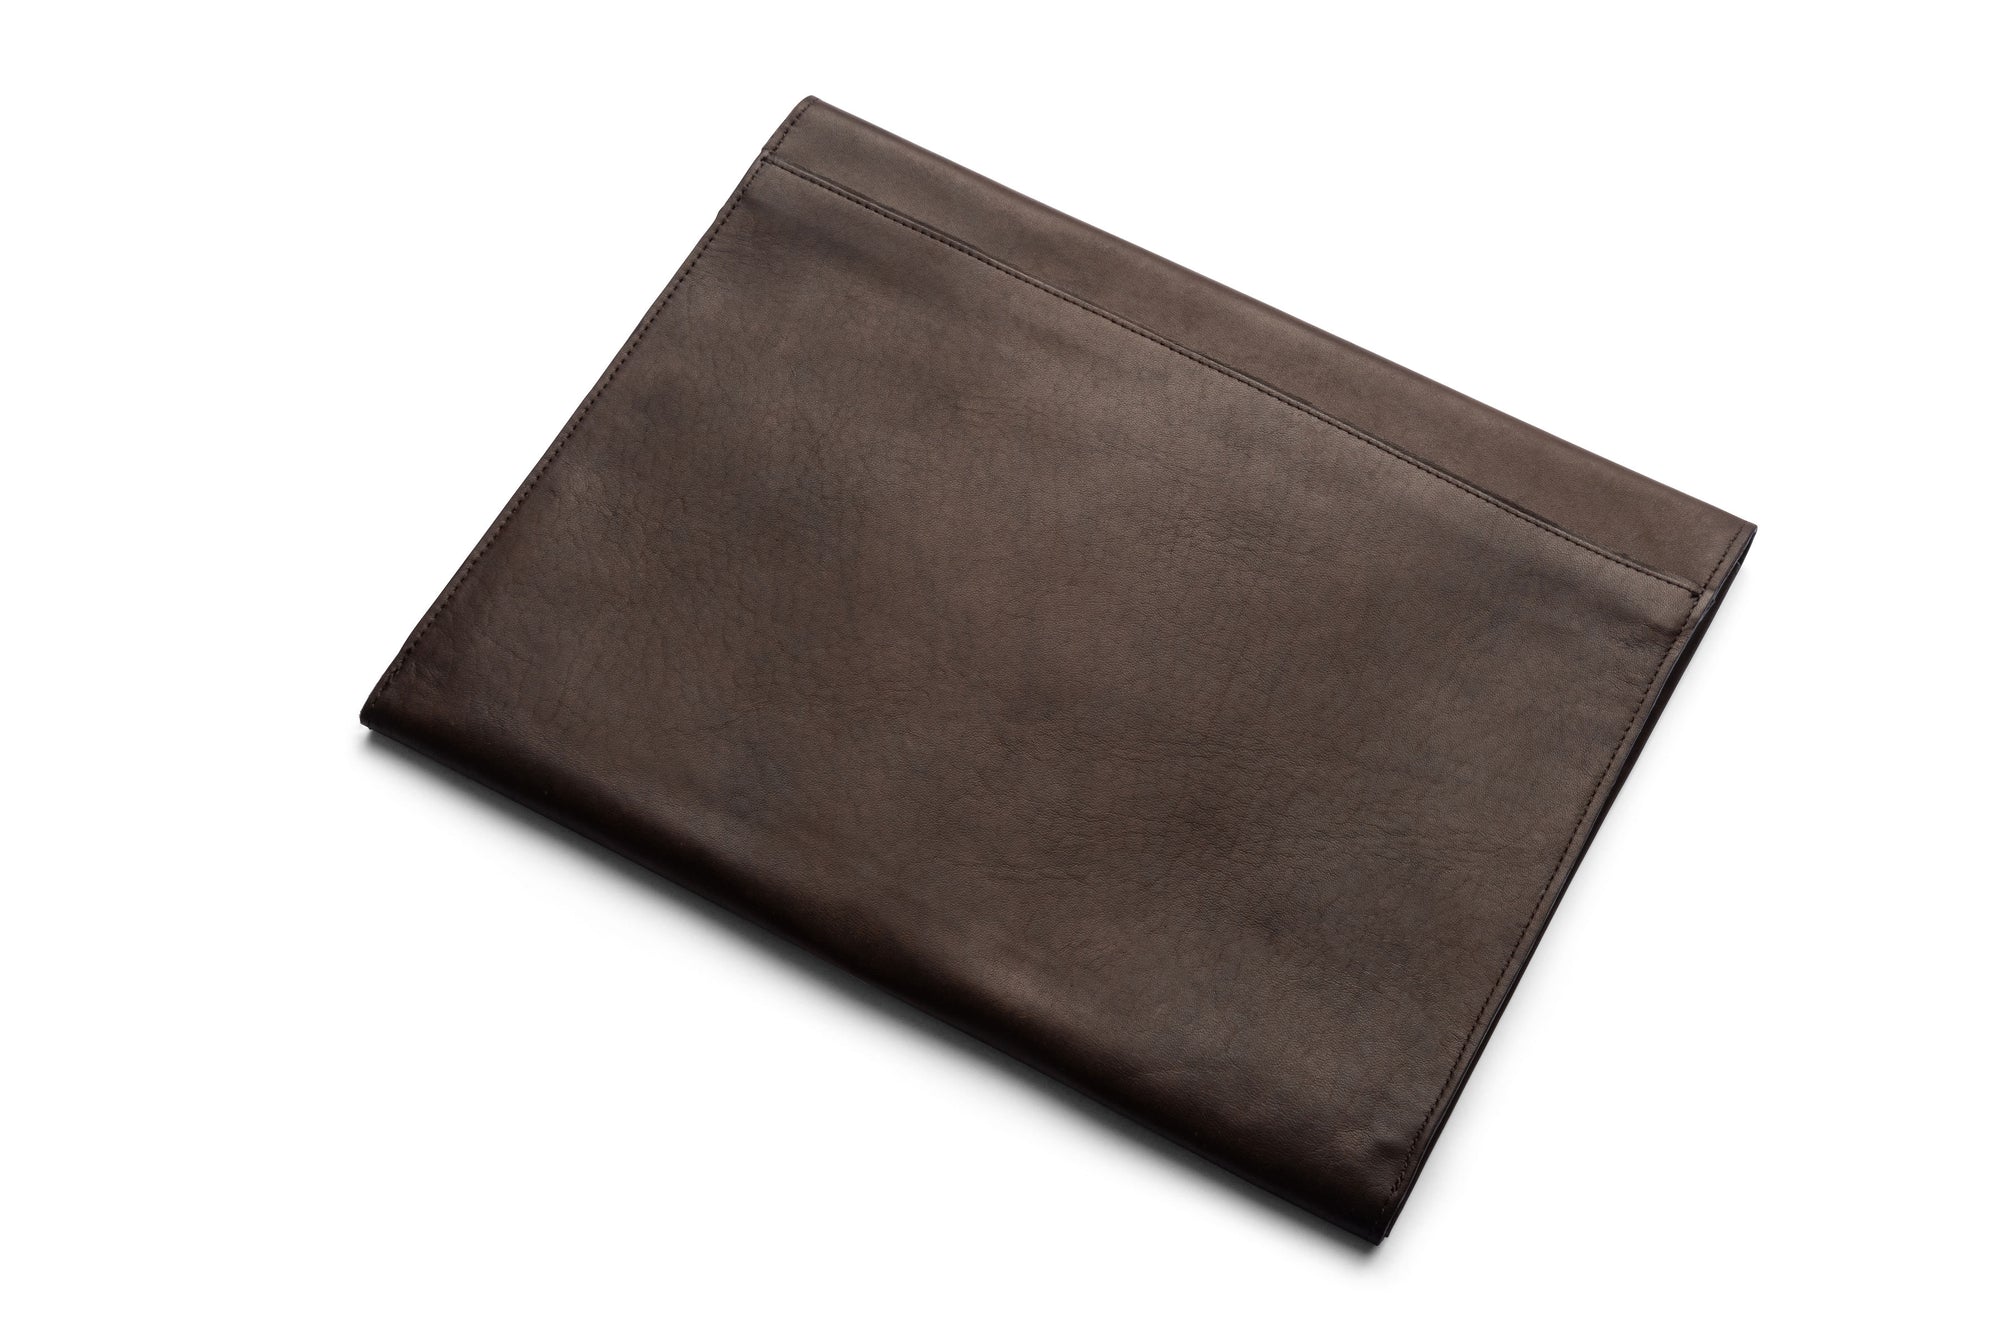 Leather document holder clutch - Brown